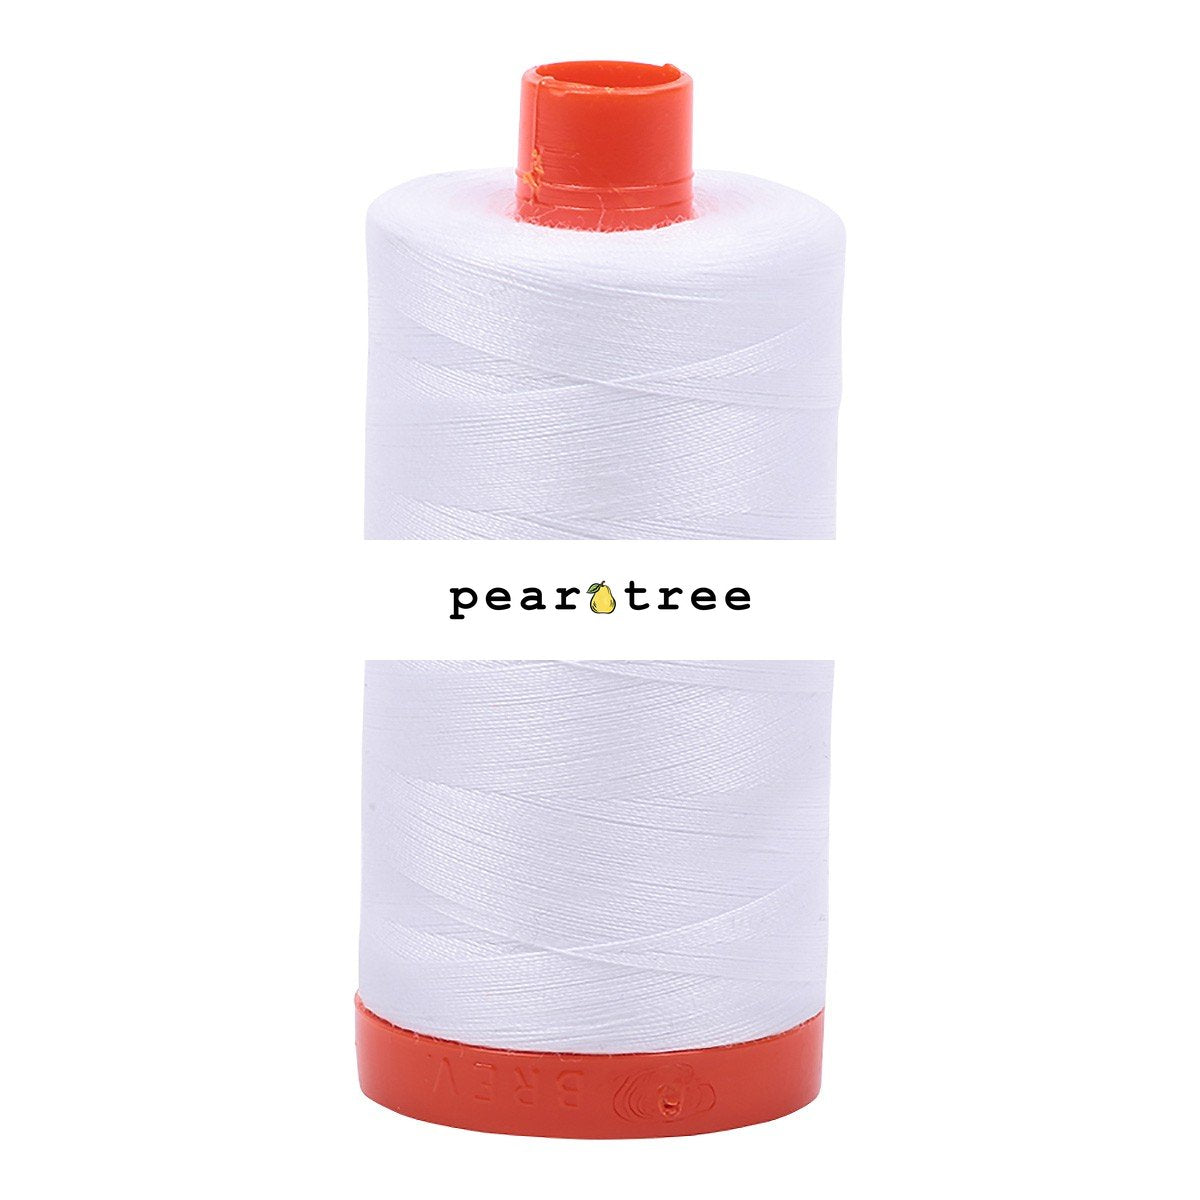 Aurifil Mako Cotton Thread Solid - White - 50wt 1422yds | Notions | A1050-2024